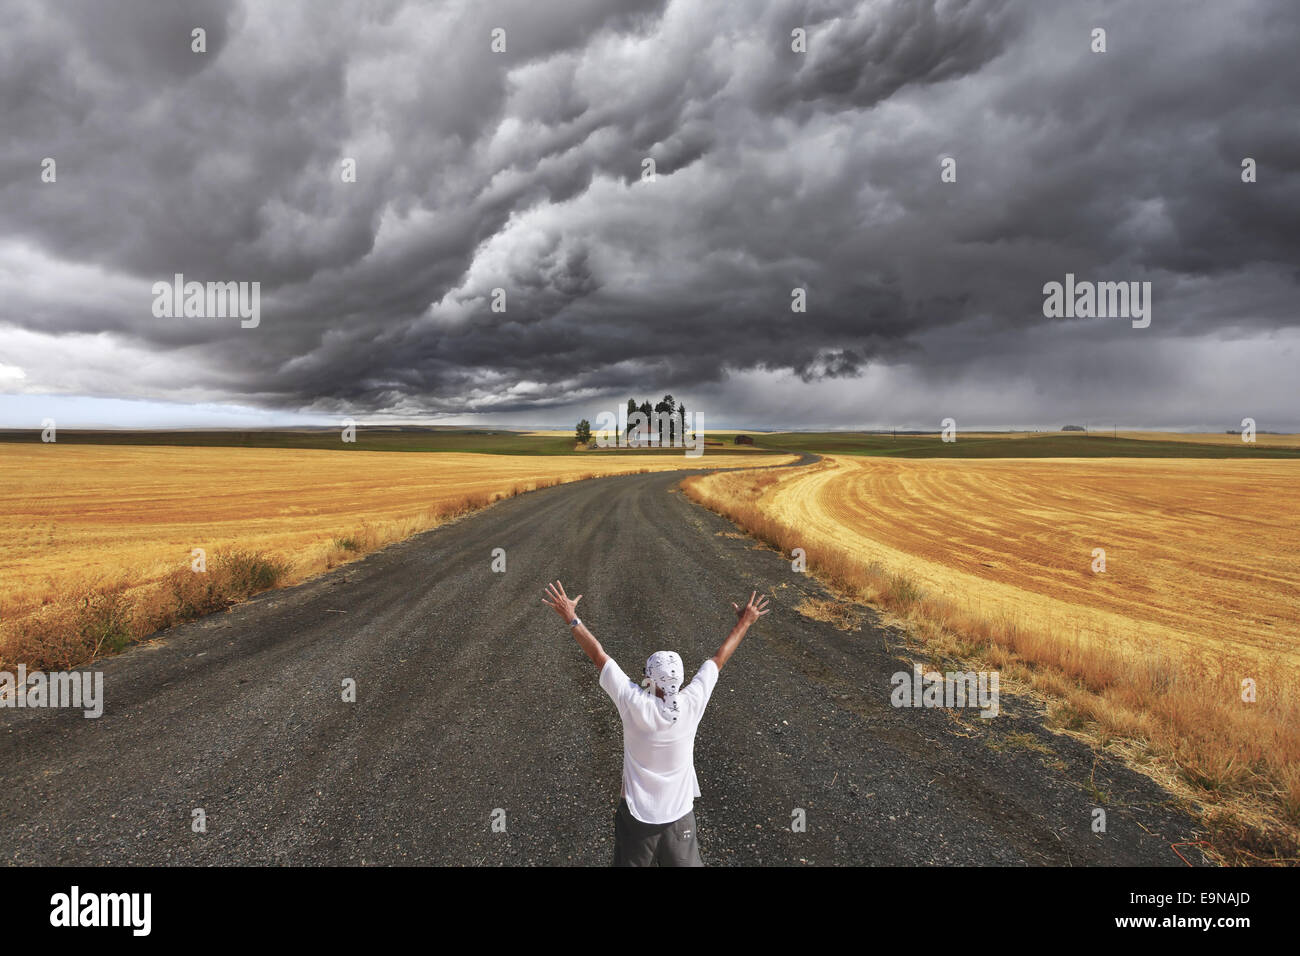 The enthusiastic tourist welcomes thunderstorm Stock Photo